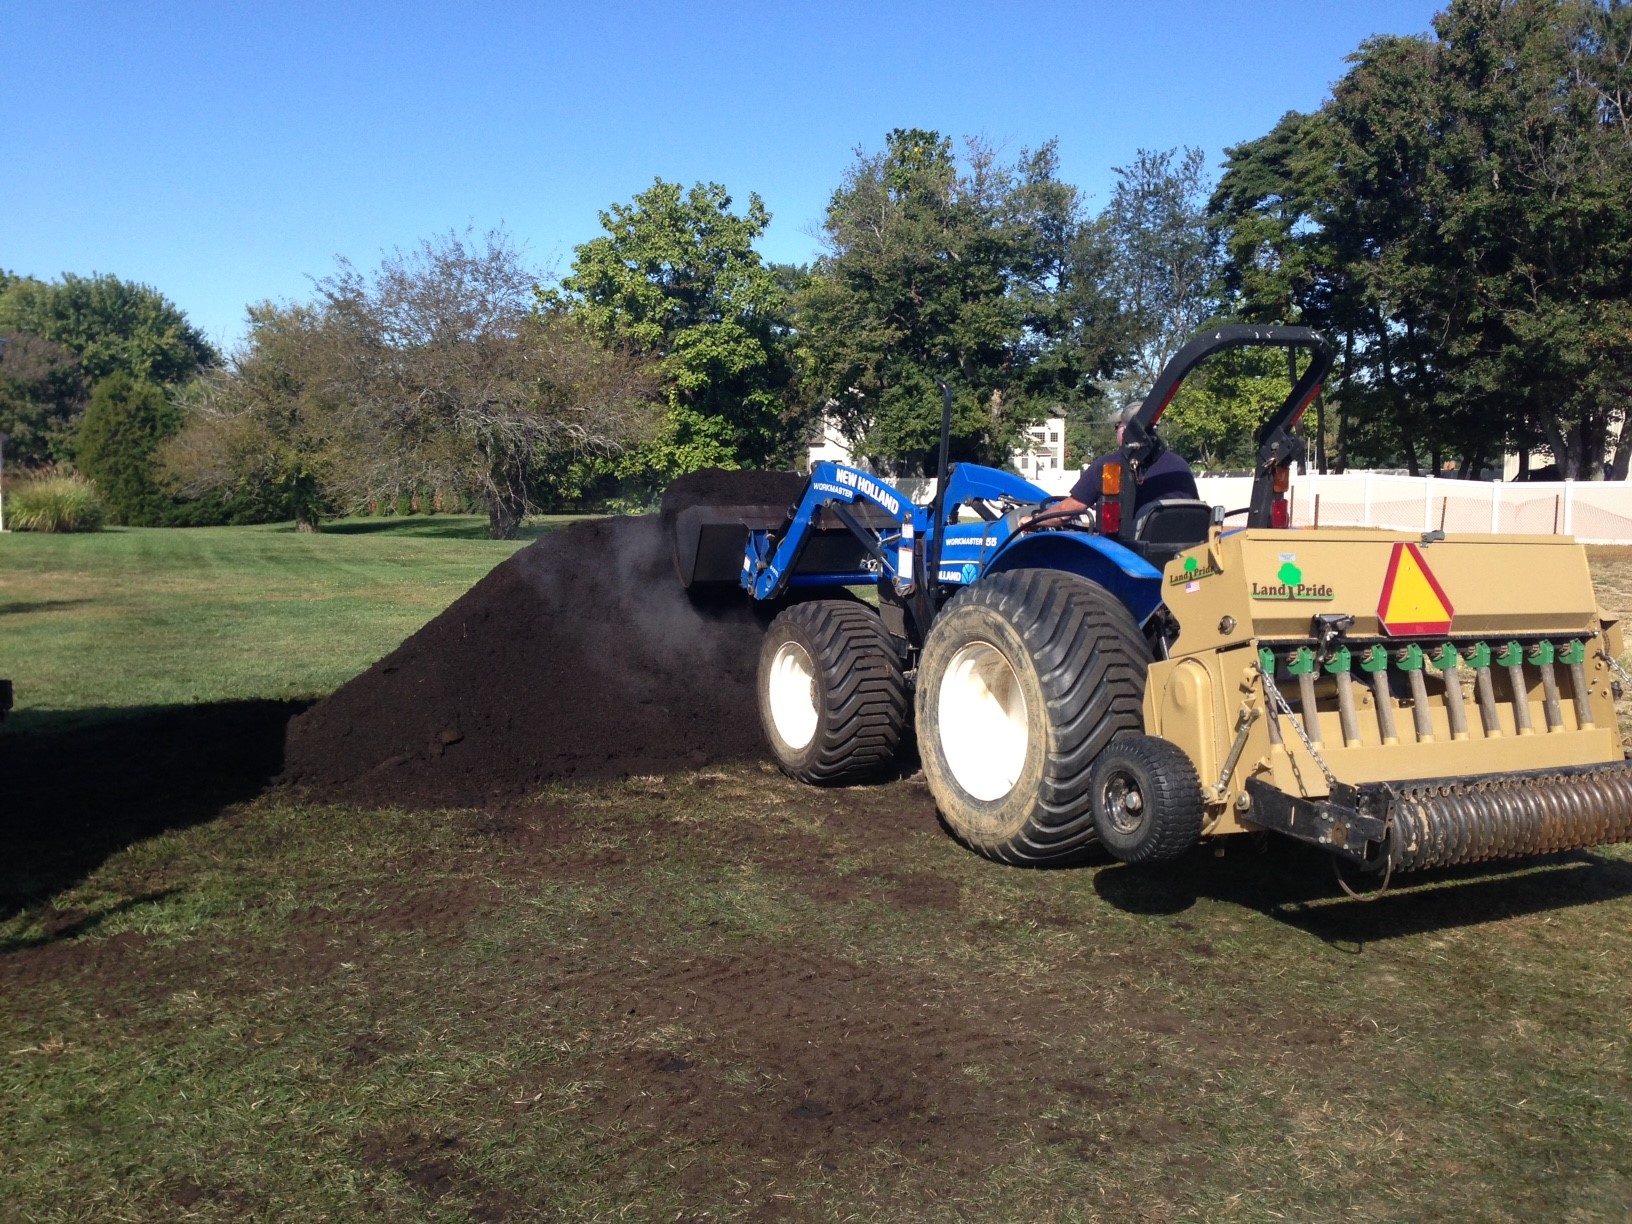 Compost being used for a sports field project